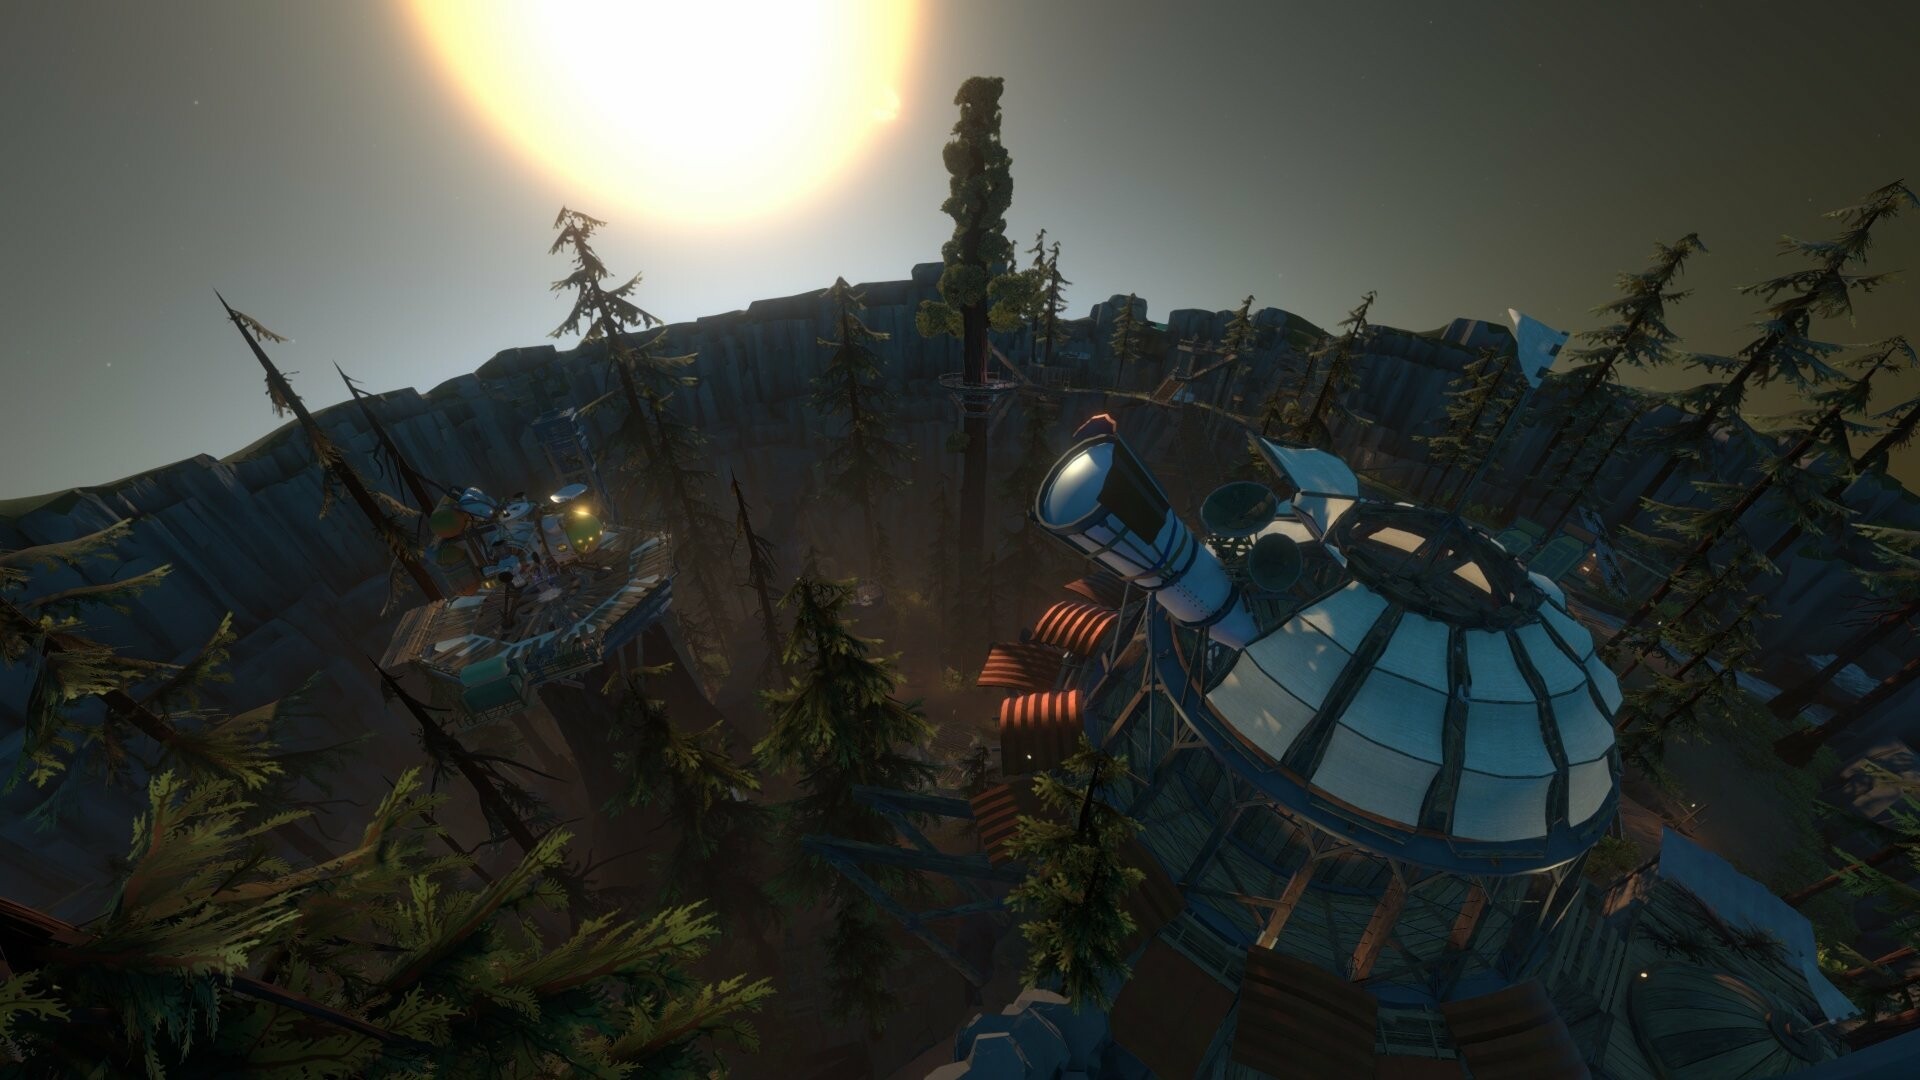 Outer Wilds: The player character has health, fuel, and oxygen meters, which are replenished when the character returns to the ship or by finding trees or refills. 1920x1080 Full HD Wallpaper.